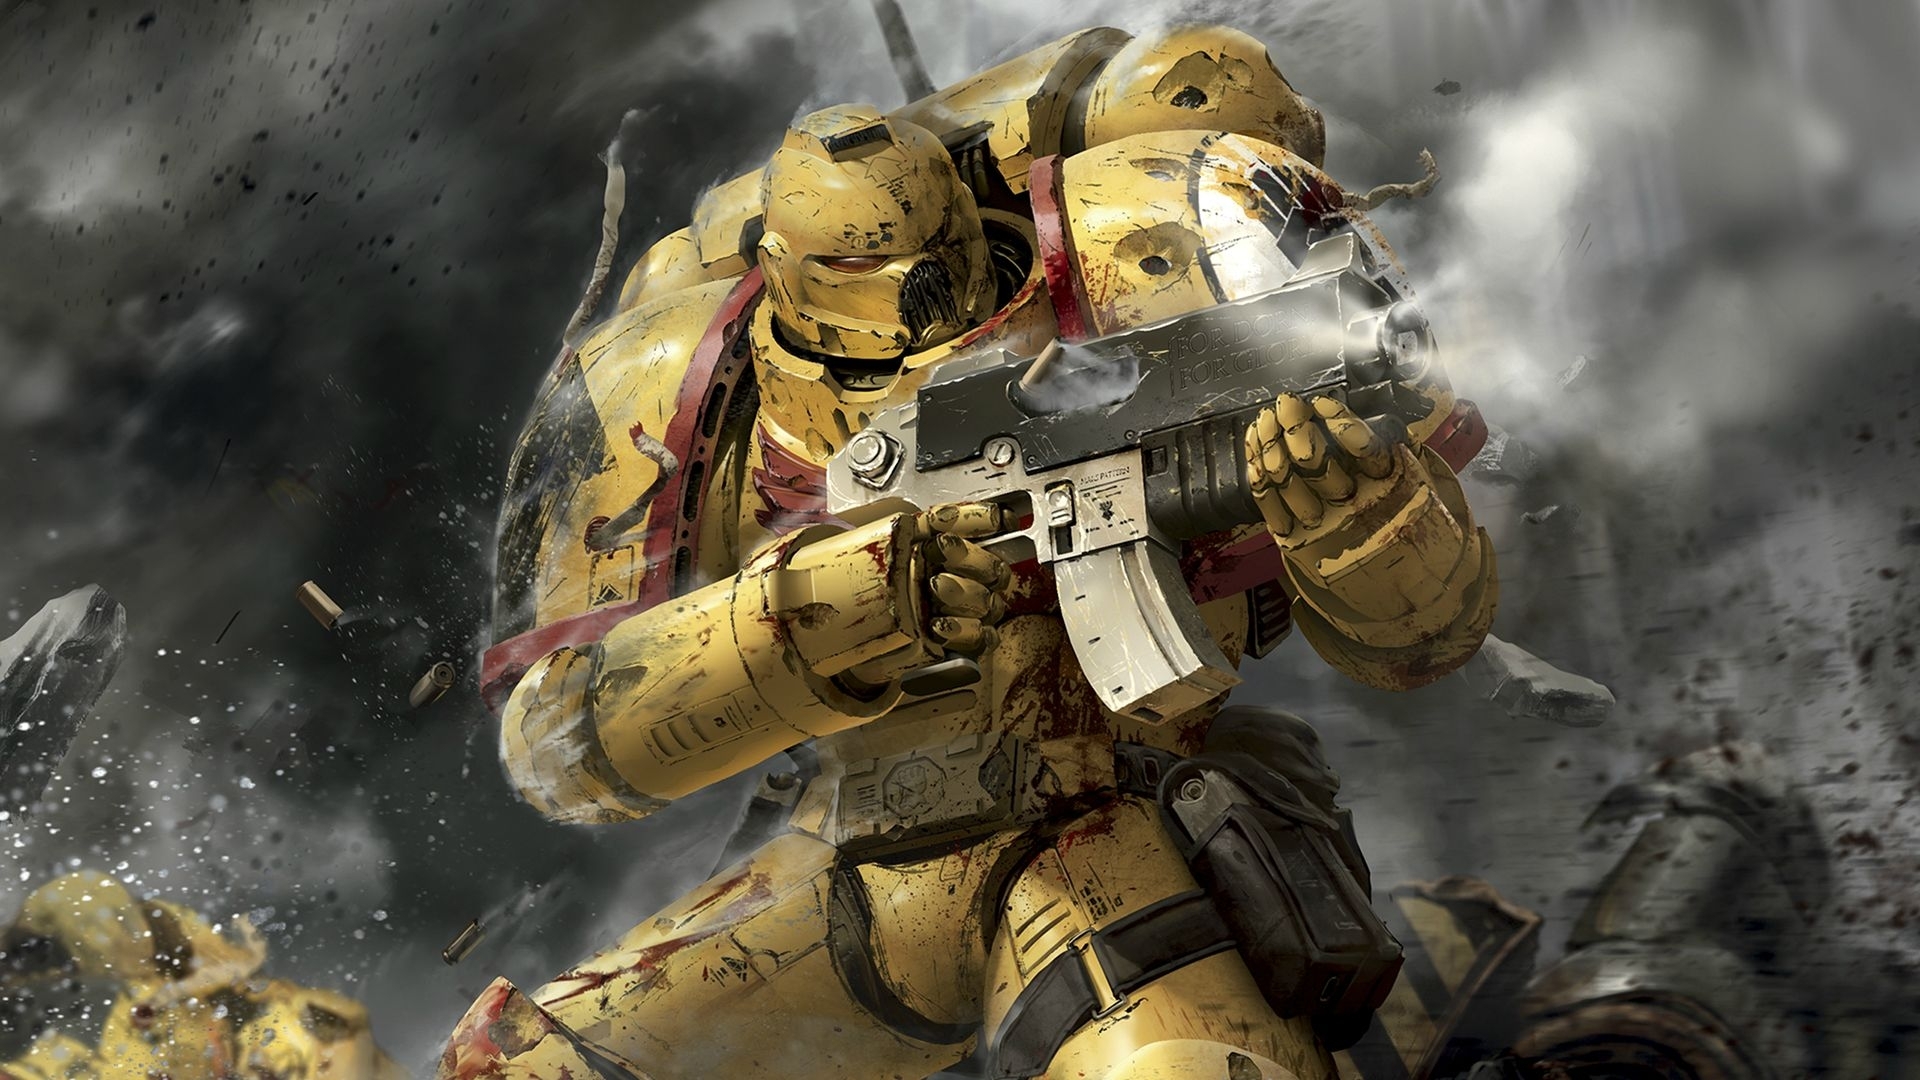 10 Top Warhammer 40K Space Marines Wallpaper FULL HD 1920×1080 For PC